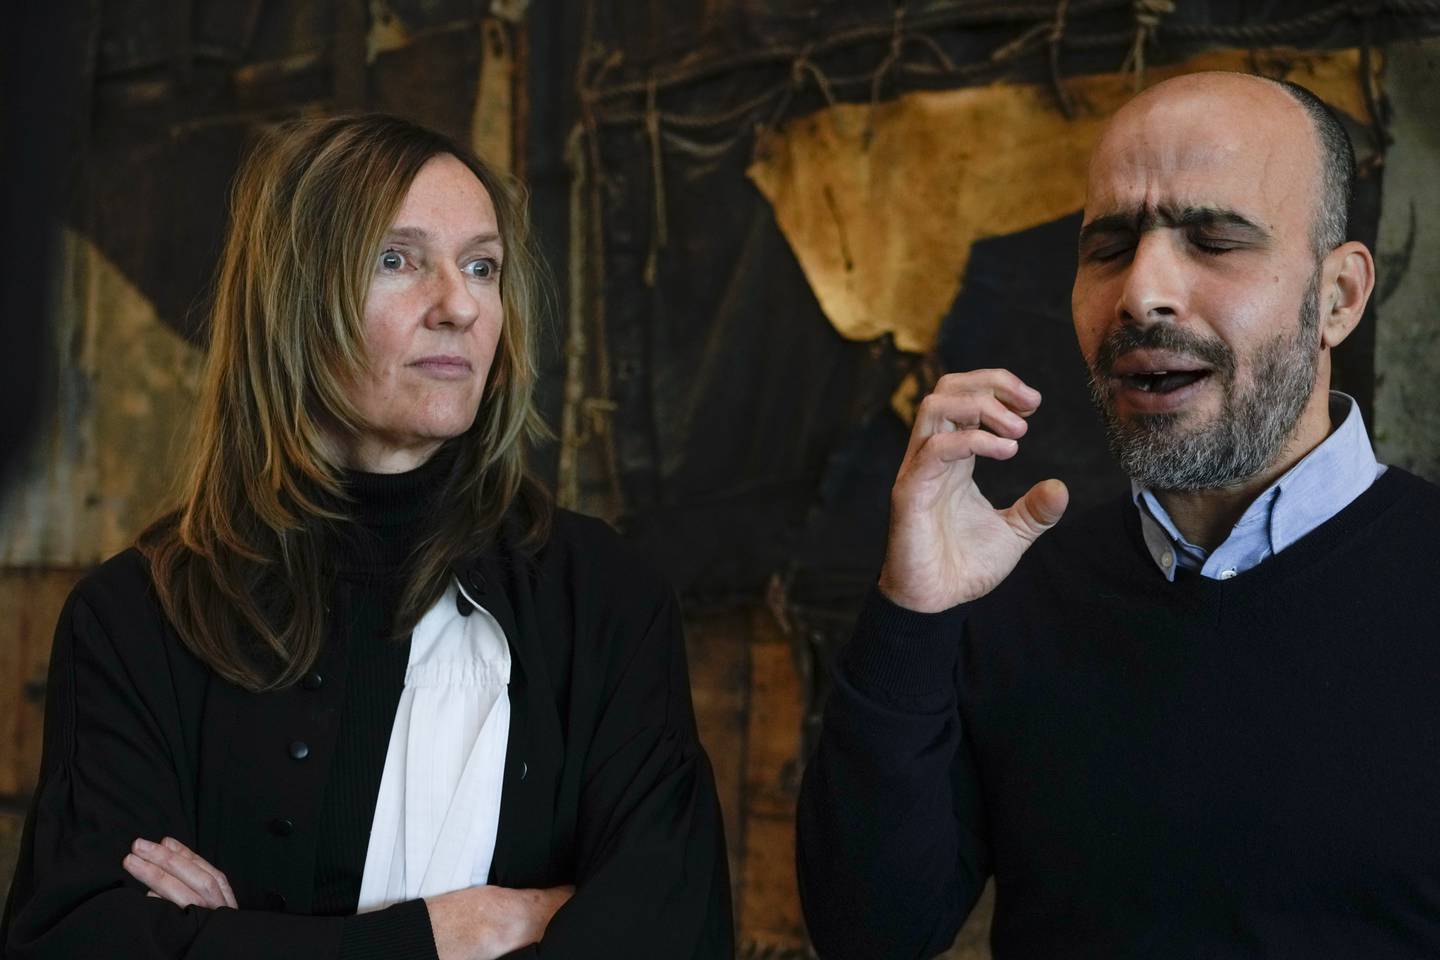 Plaintiff Ismail Ziada, right, and his lawyer Liesbeth Zegveld, after the Dutch appeals court ruling. AP